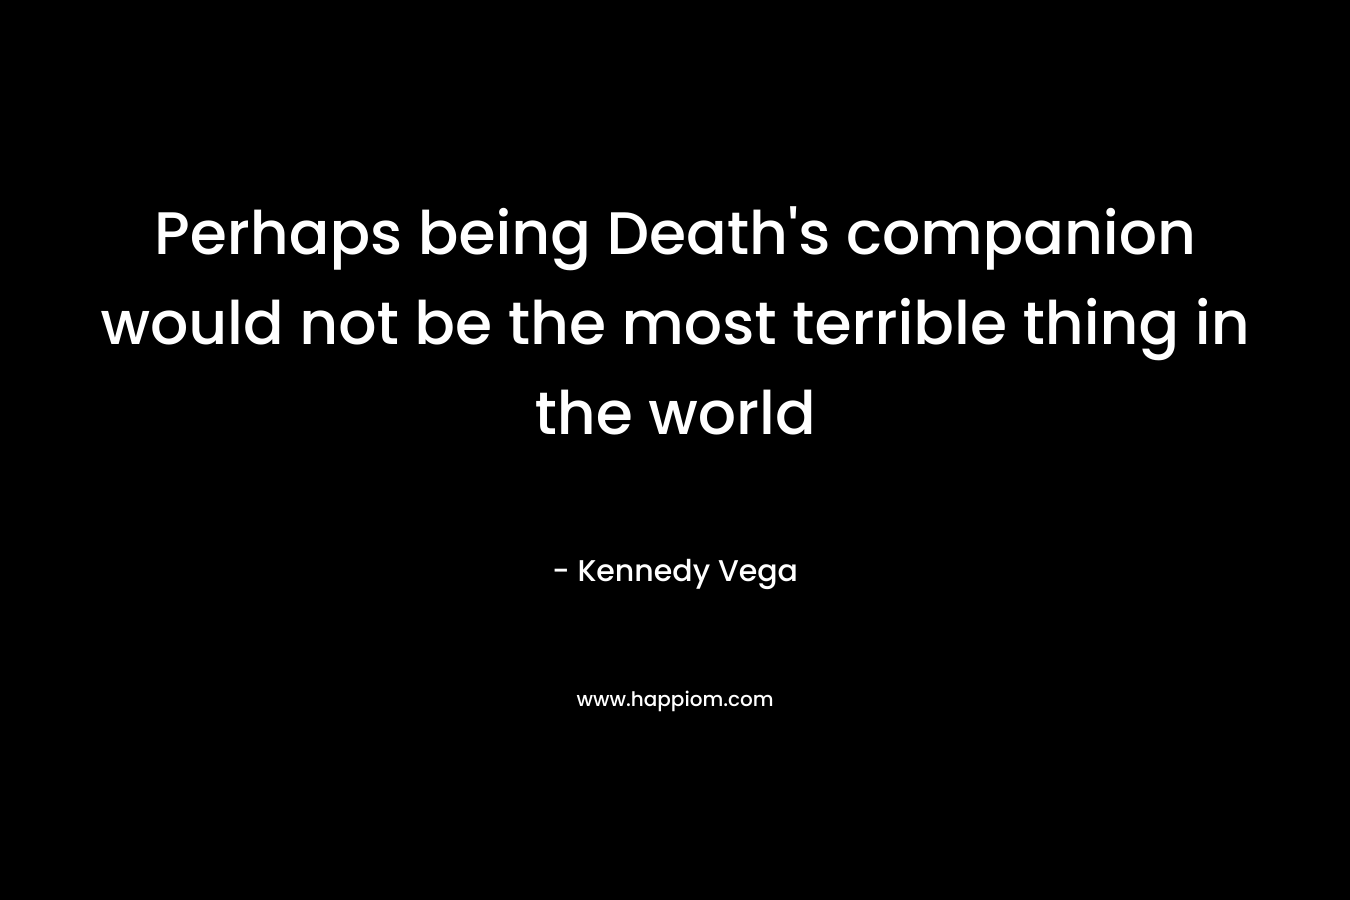 Perhaps being Death's companion would not be the most terrible thing in the world